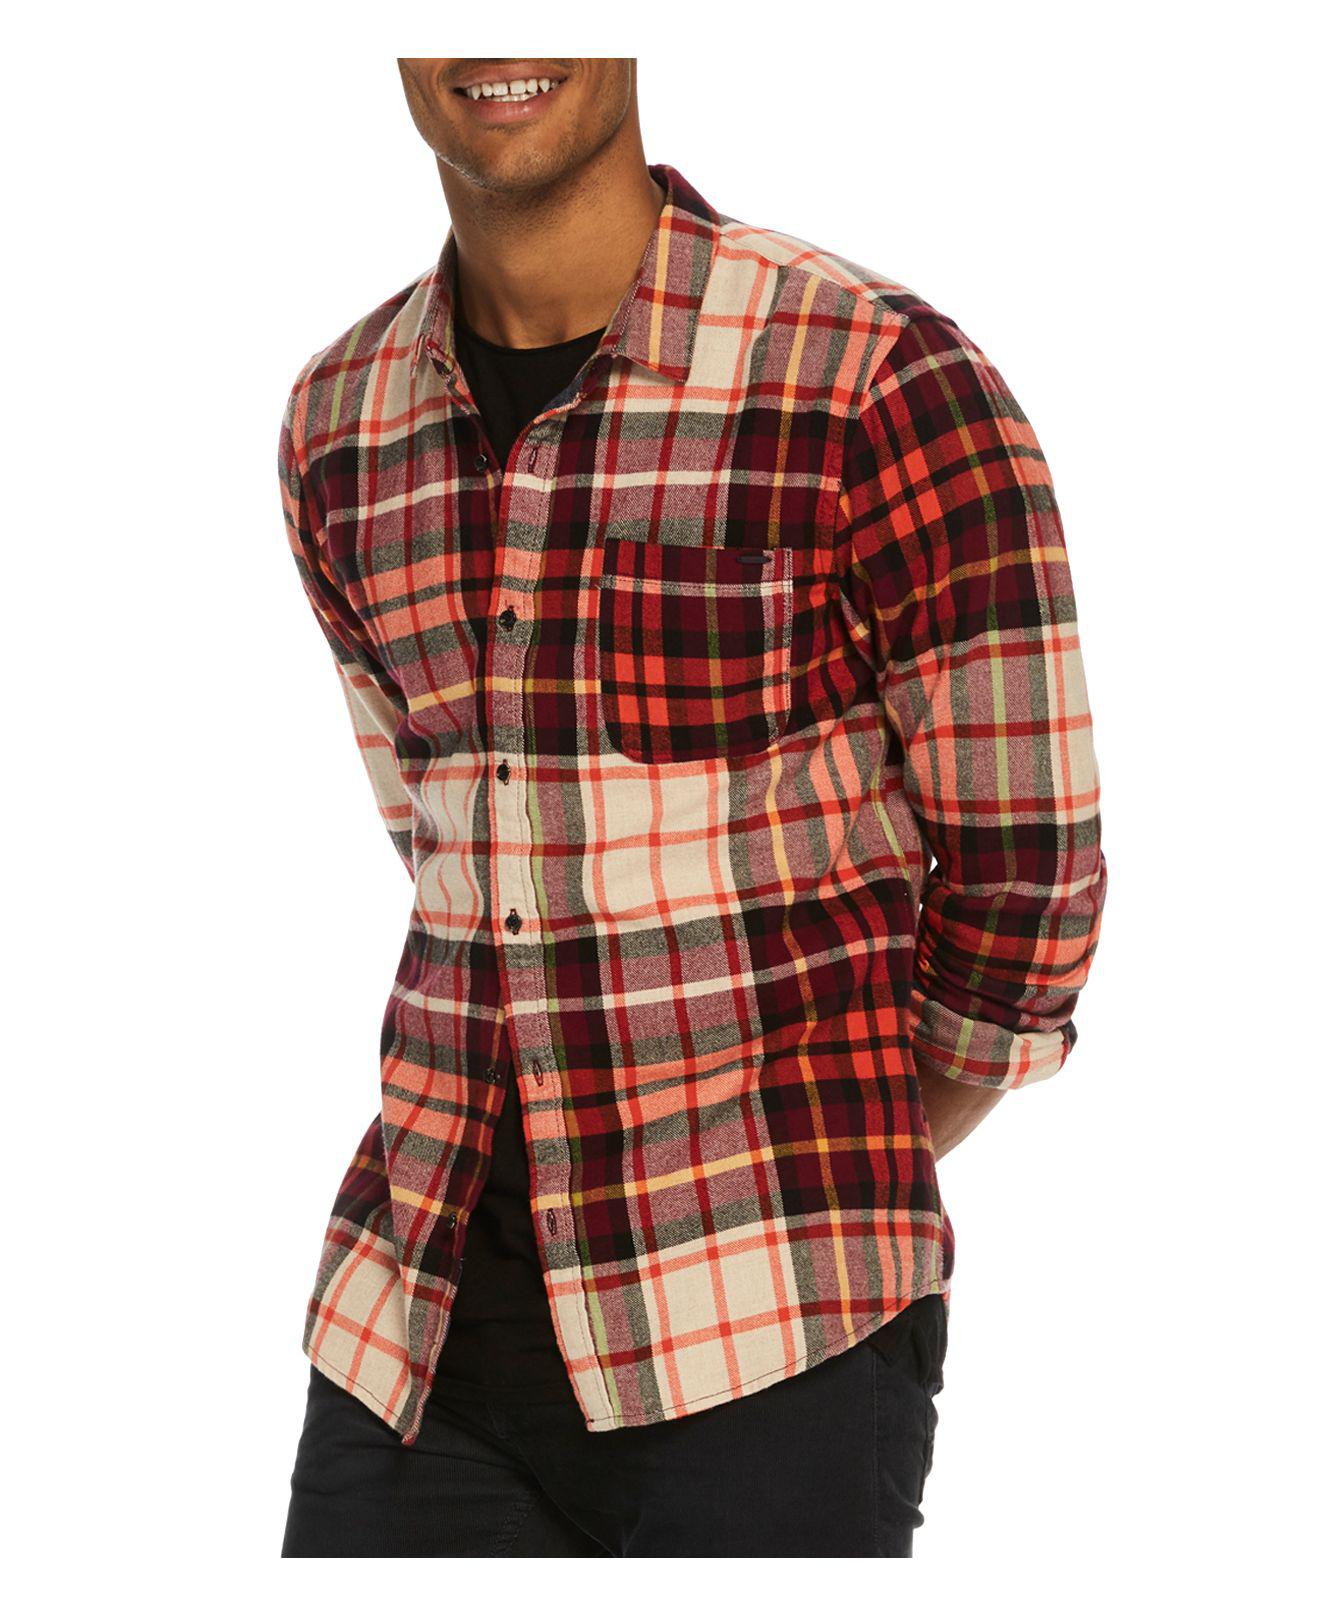 Lyst - Scotch & Soda Flannel Regular Fit Shirt in Red for Men